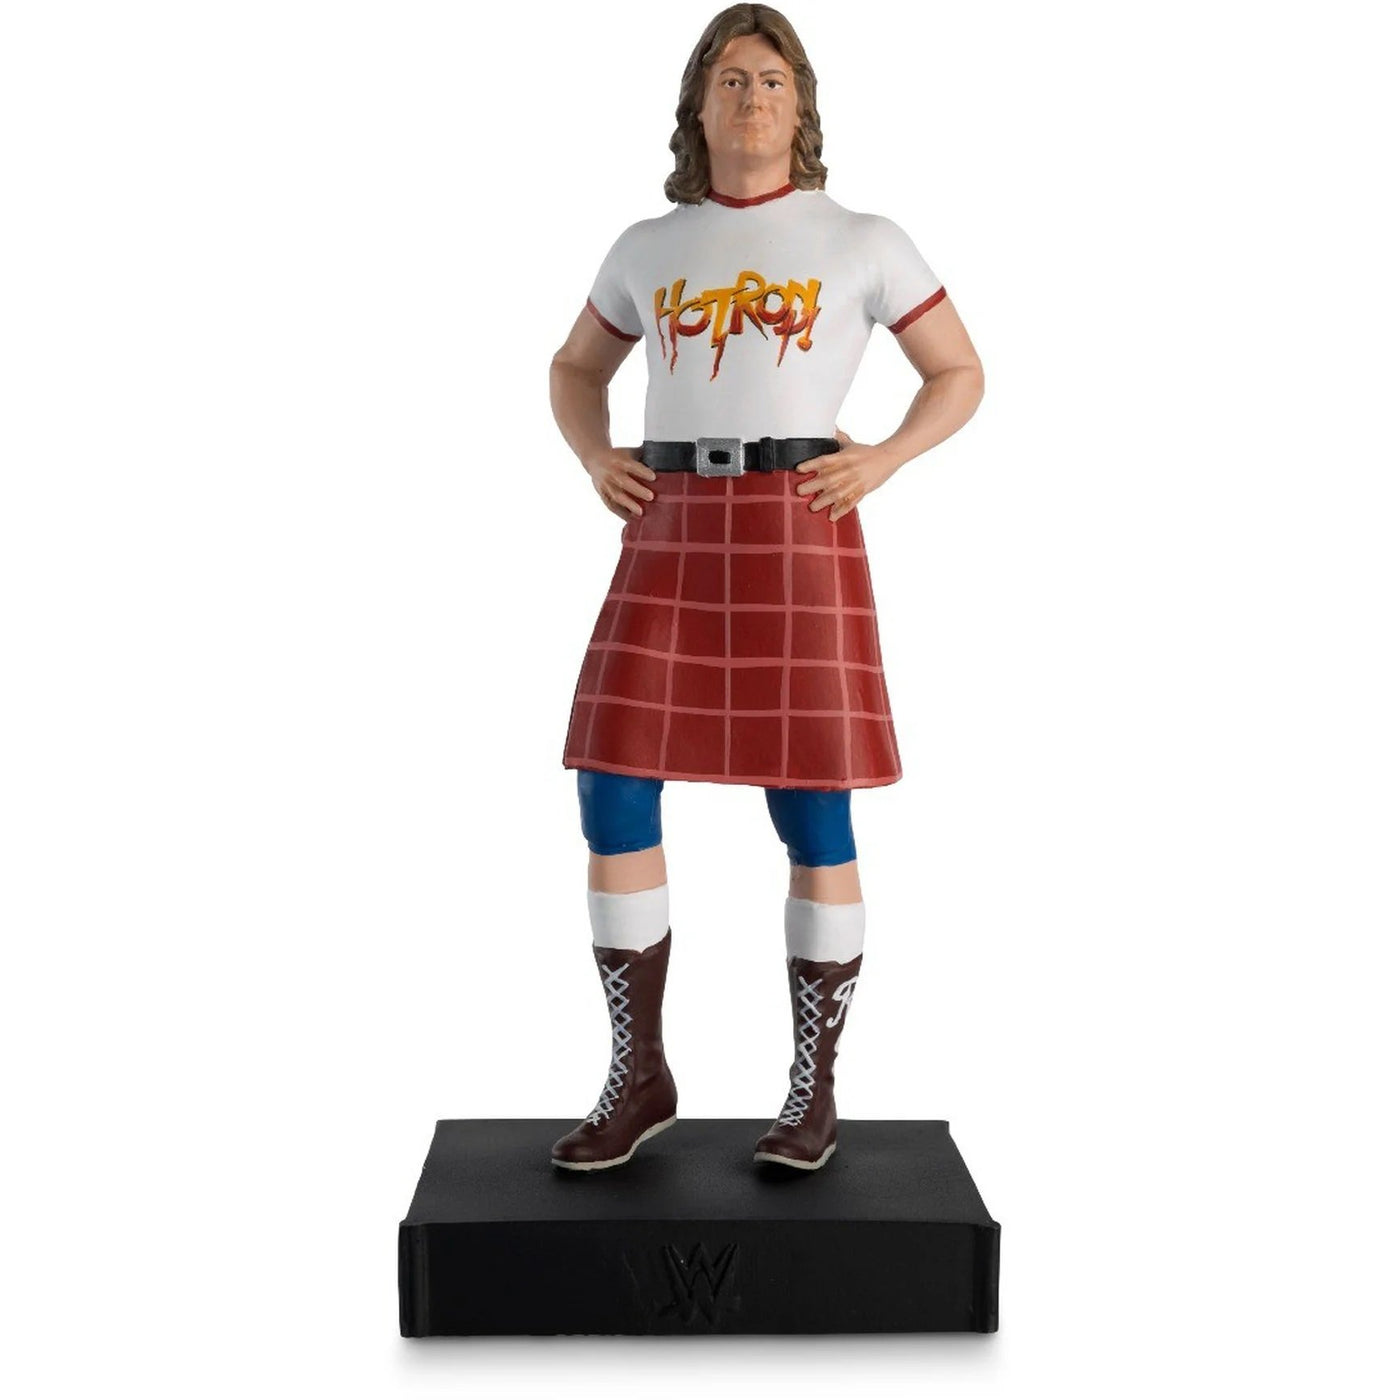 Hero Collector WWE Championship Collection - Rowdy Roddy Piper with Magazine Issue 30